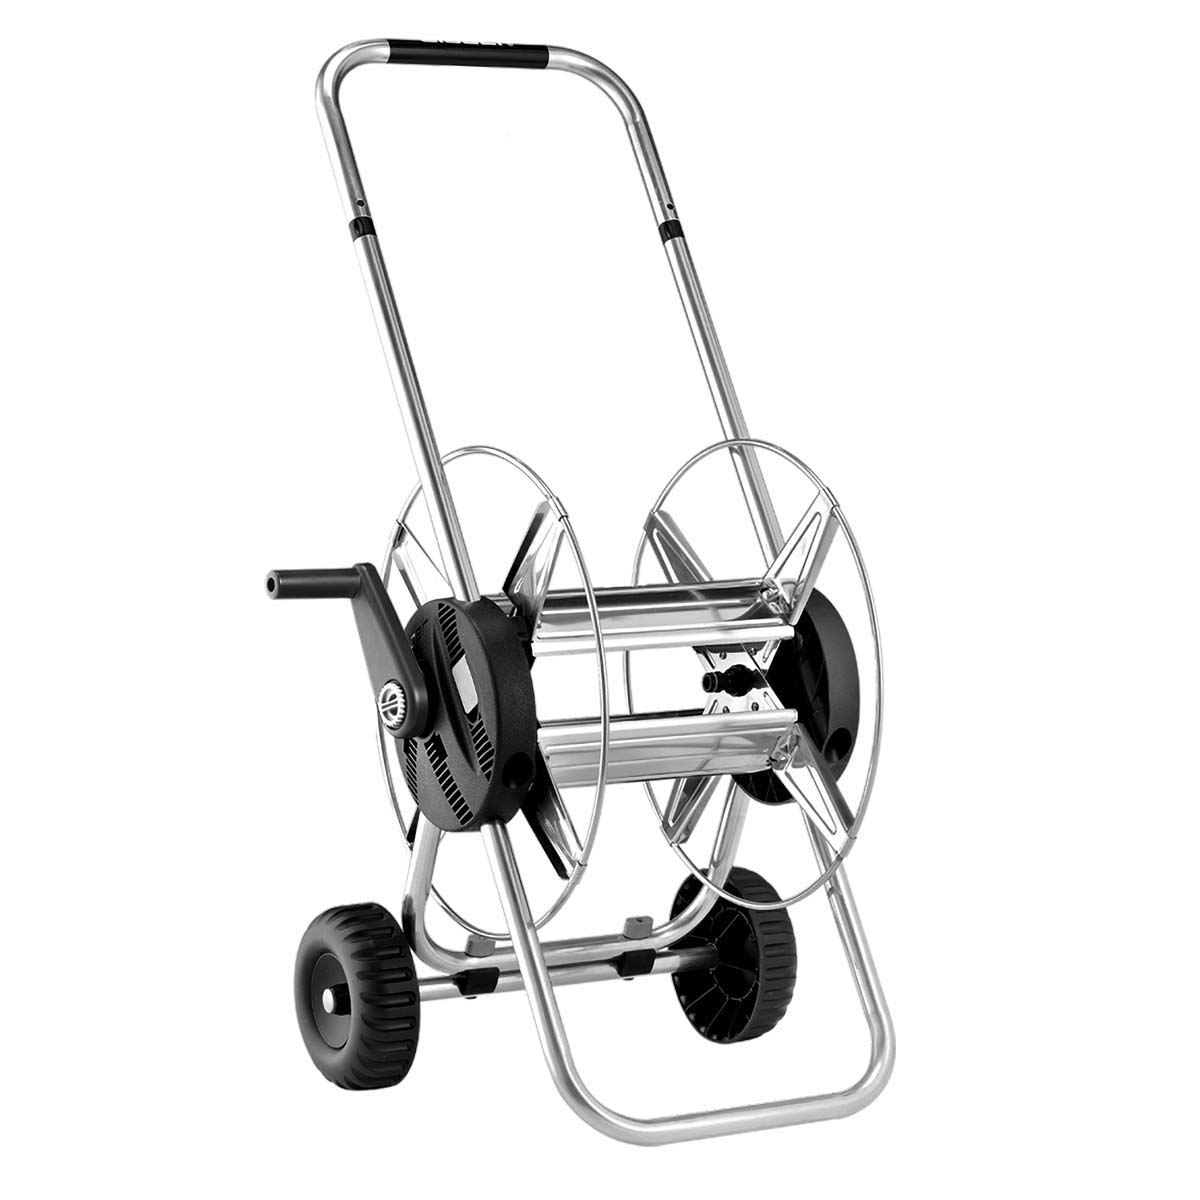 Claber Metal 40 Wall and Floor Mounted Hose Reel for sale online